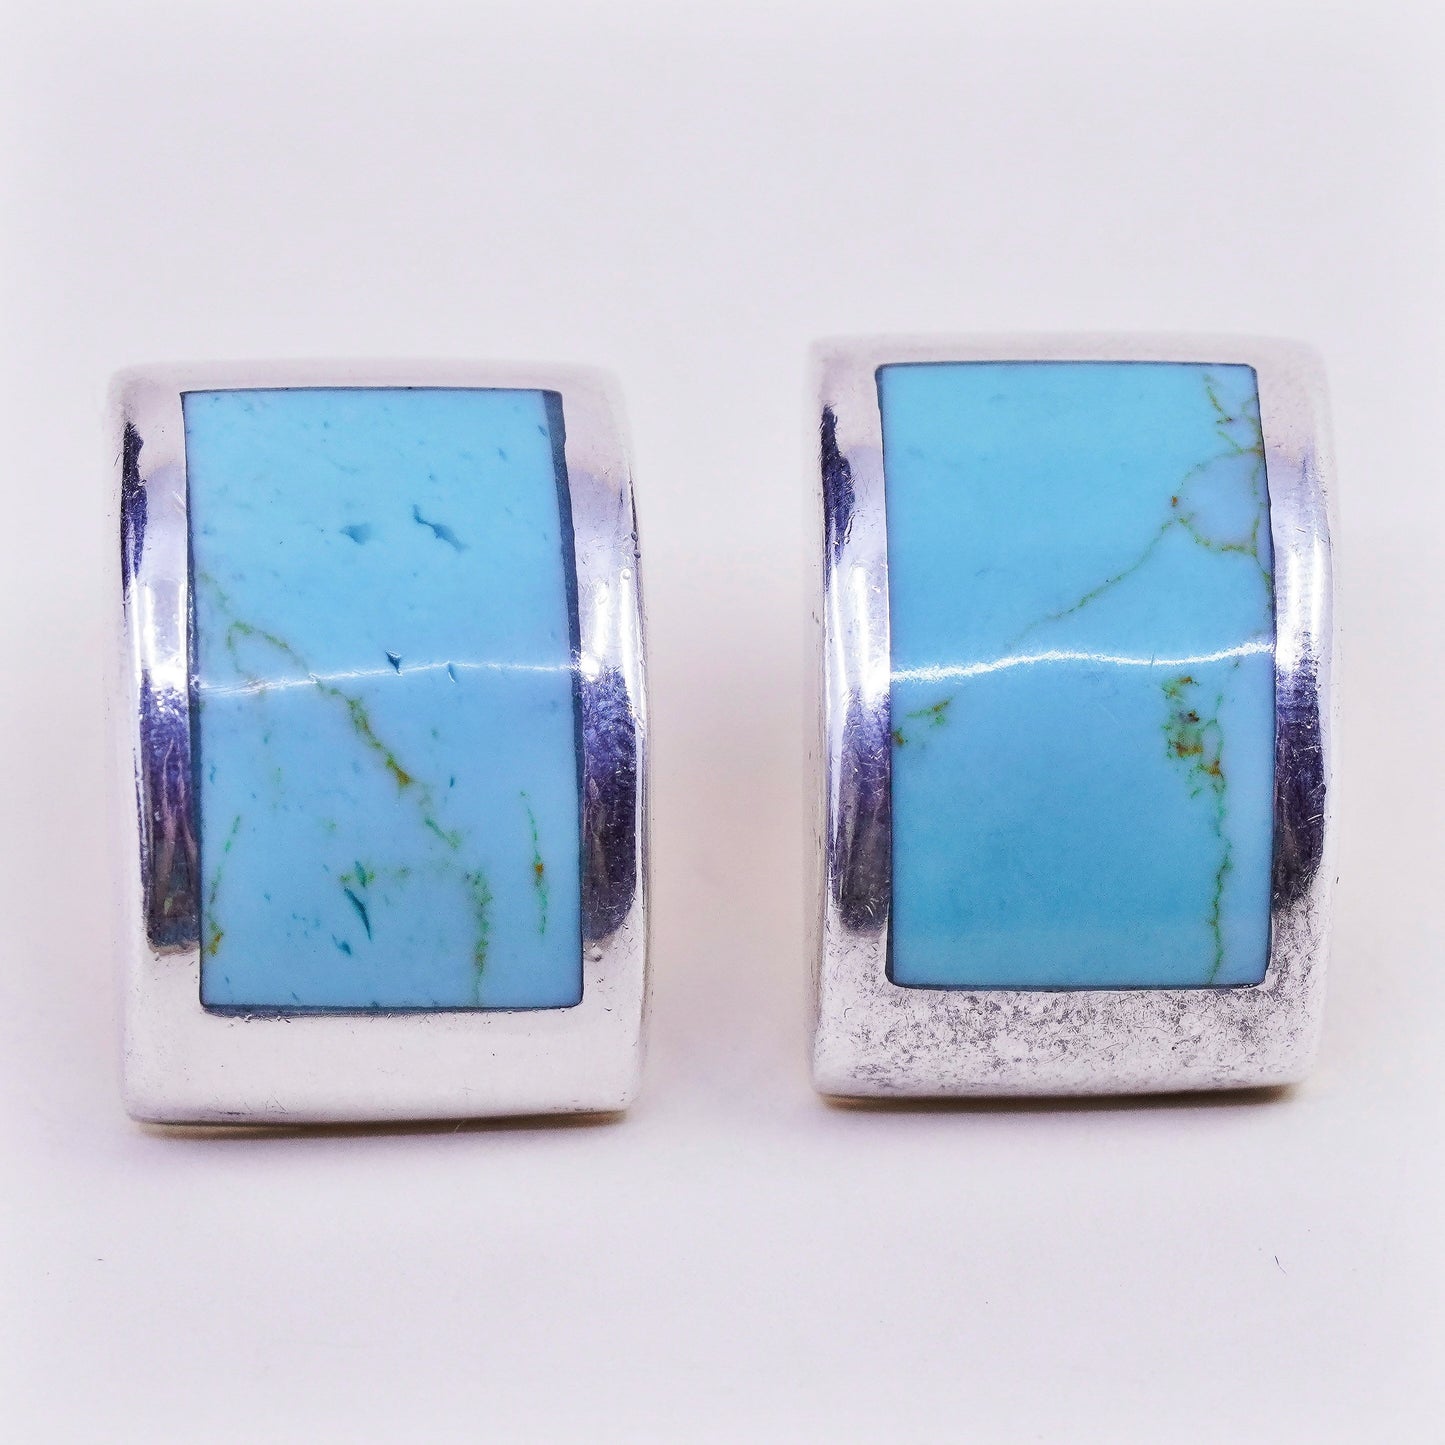 Vintage Sterling silver handmade earrings, Mexico 925 square studs w/ turquoise